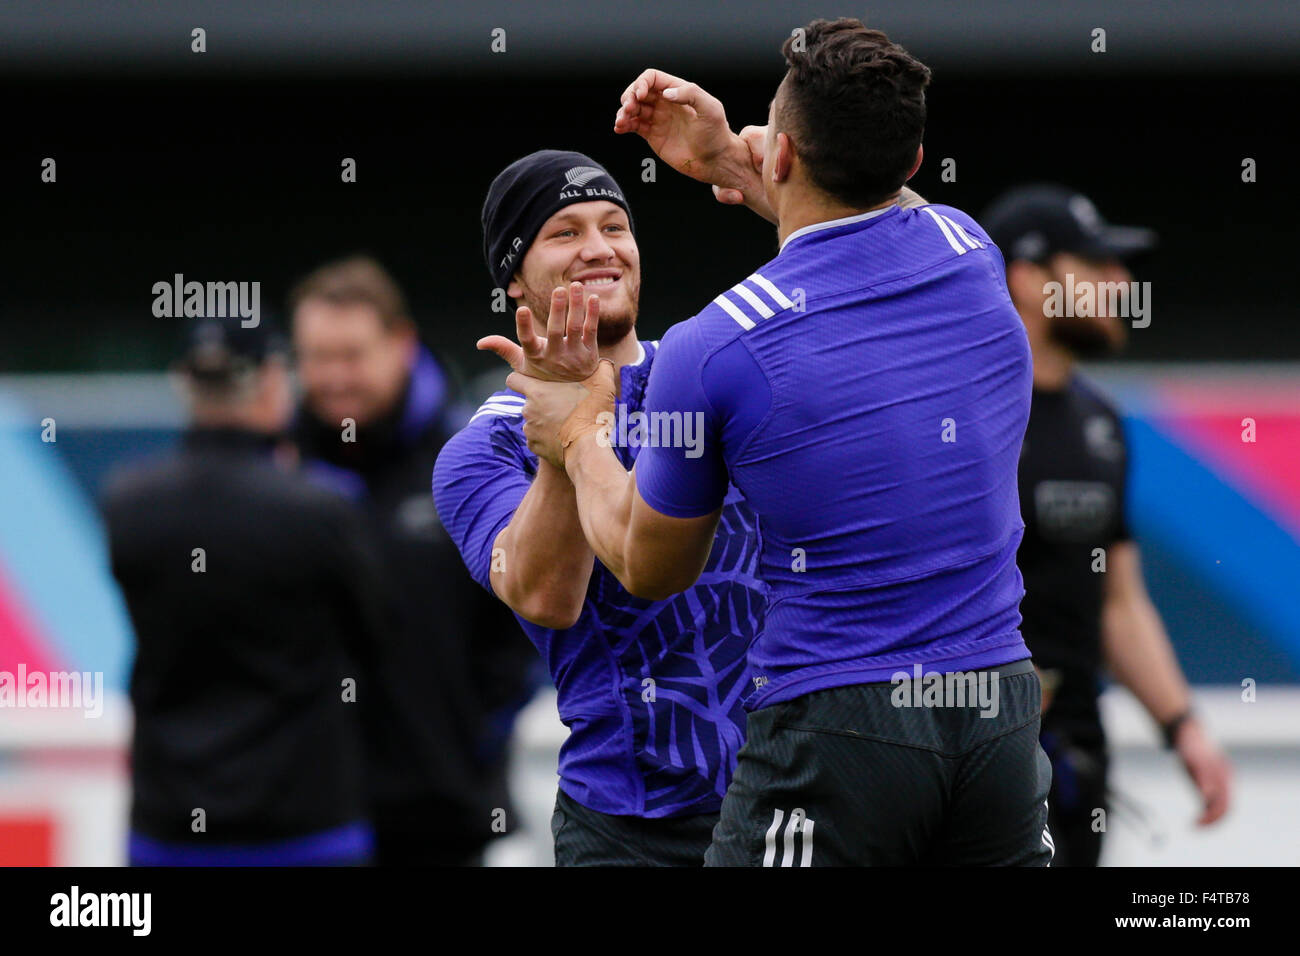 Sunbury, UK. 22nd Oct, 2015. New Zealand team training session ahead of their semi-final against South Africa on Oct 24th. New Zealand centre Sonny Bill Williams wrestles with replacement scrumhalf TJ Perenara © Action Plus Sports/Alamy Live News Stock Photo